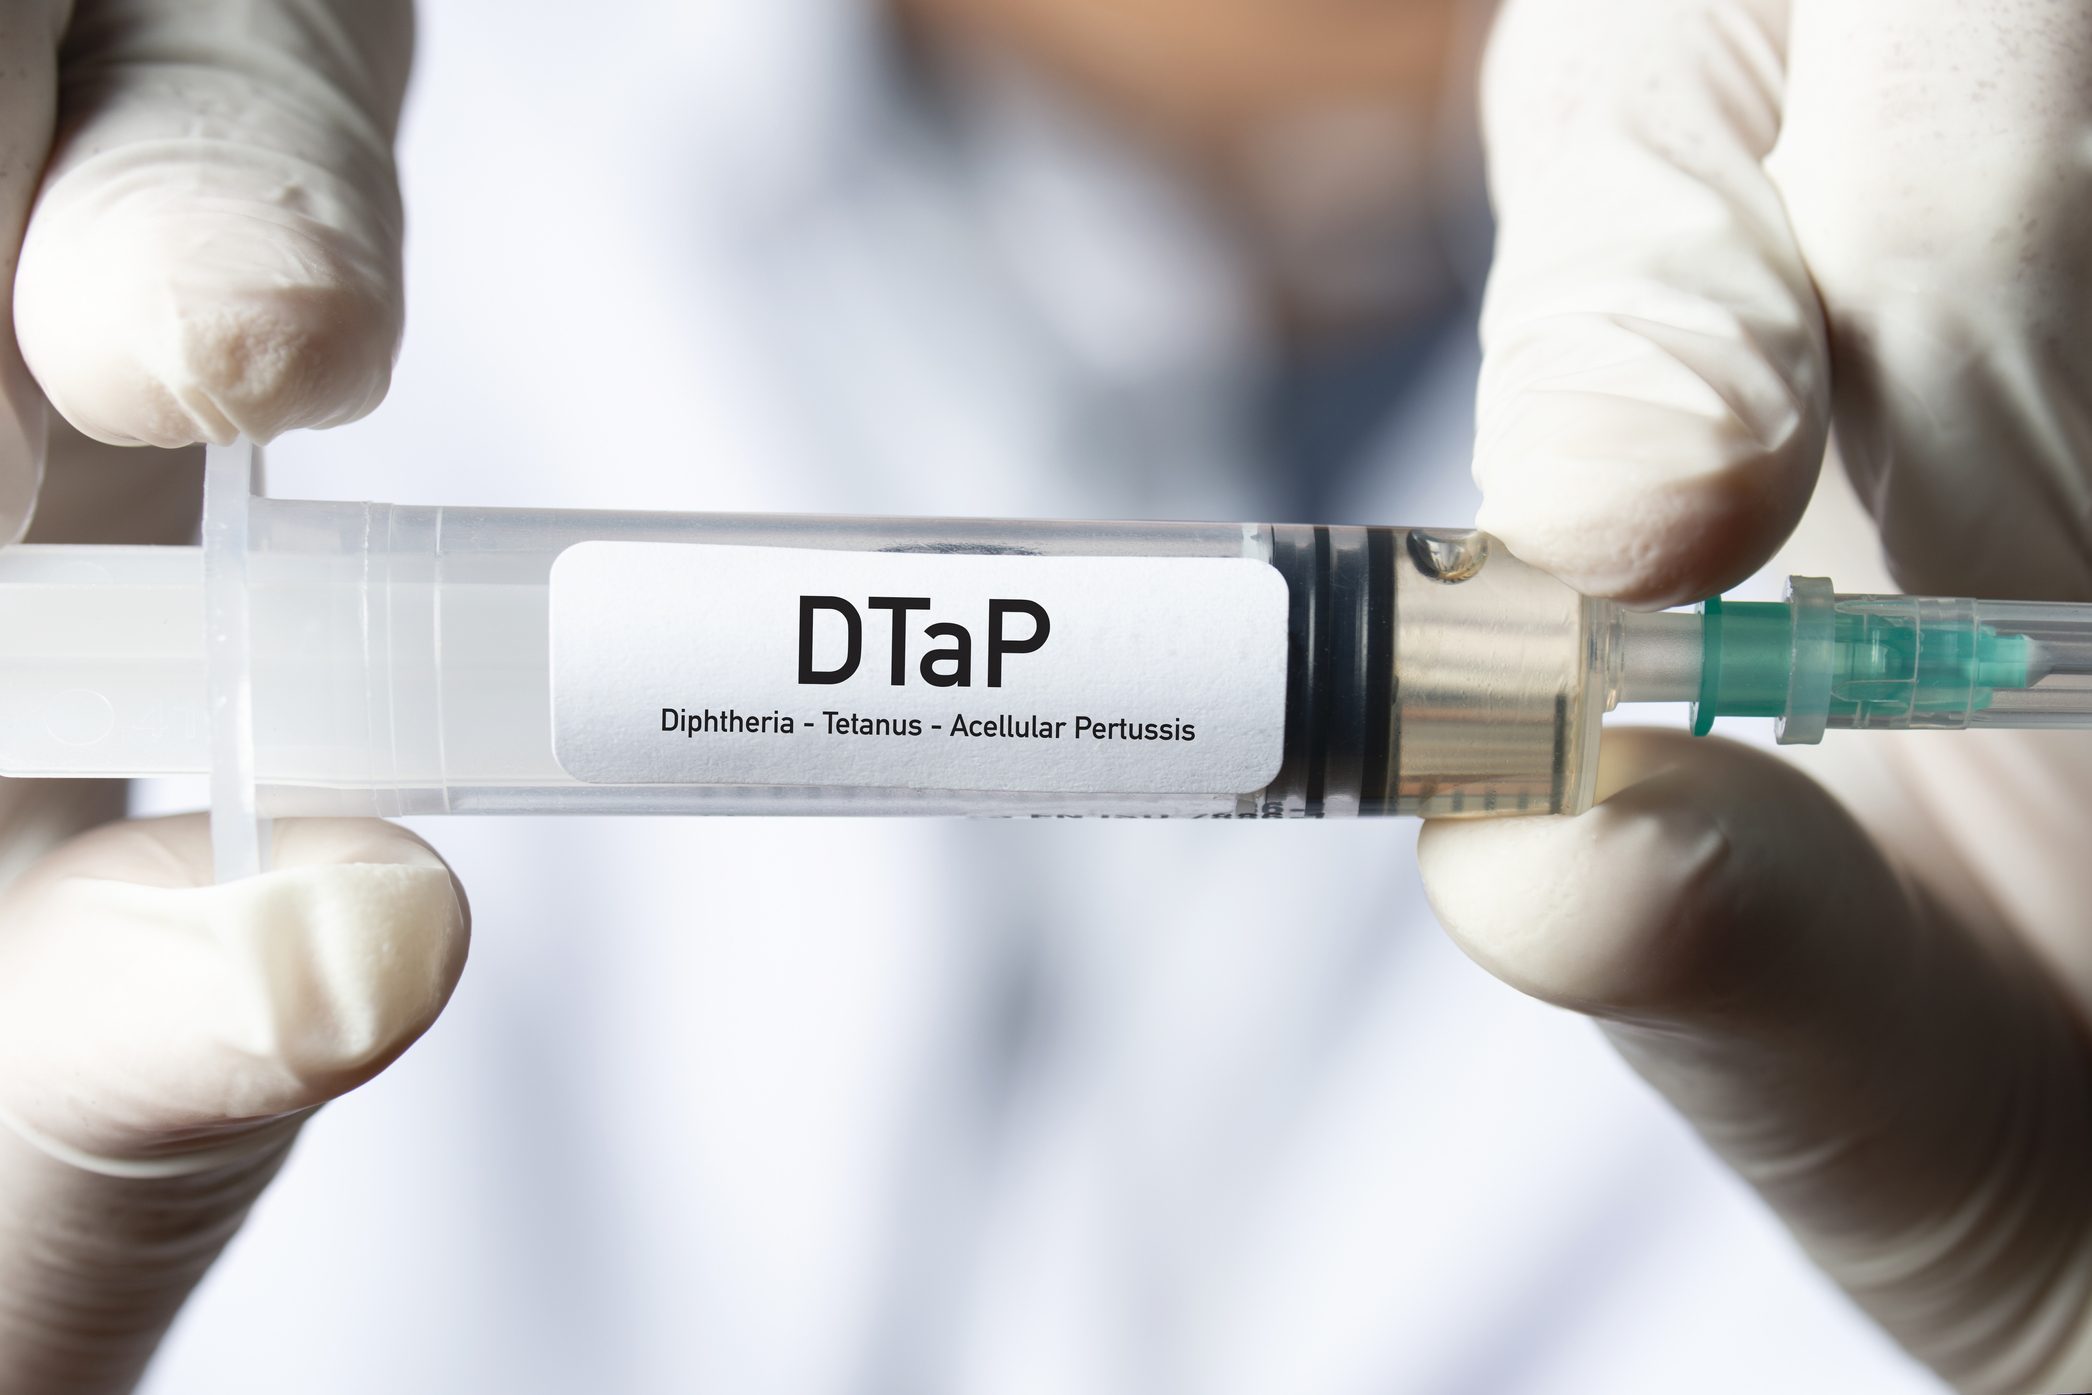 7 Things to Know About the DTaP Vaccine for Whooping Cough